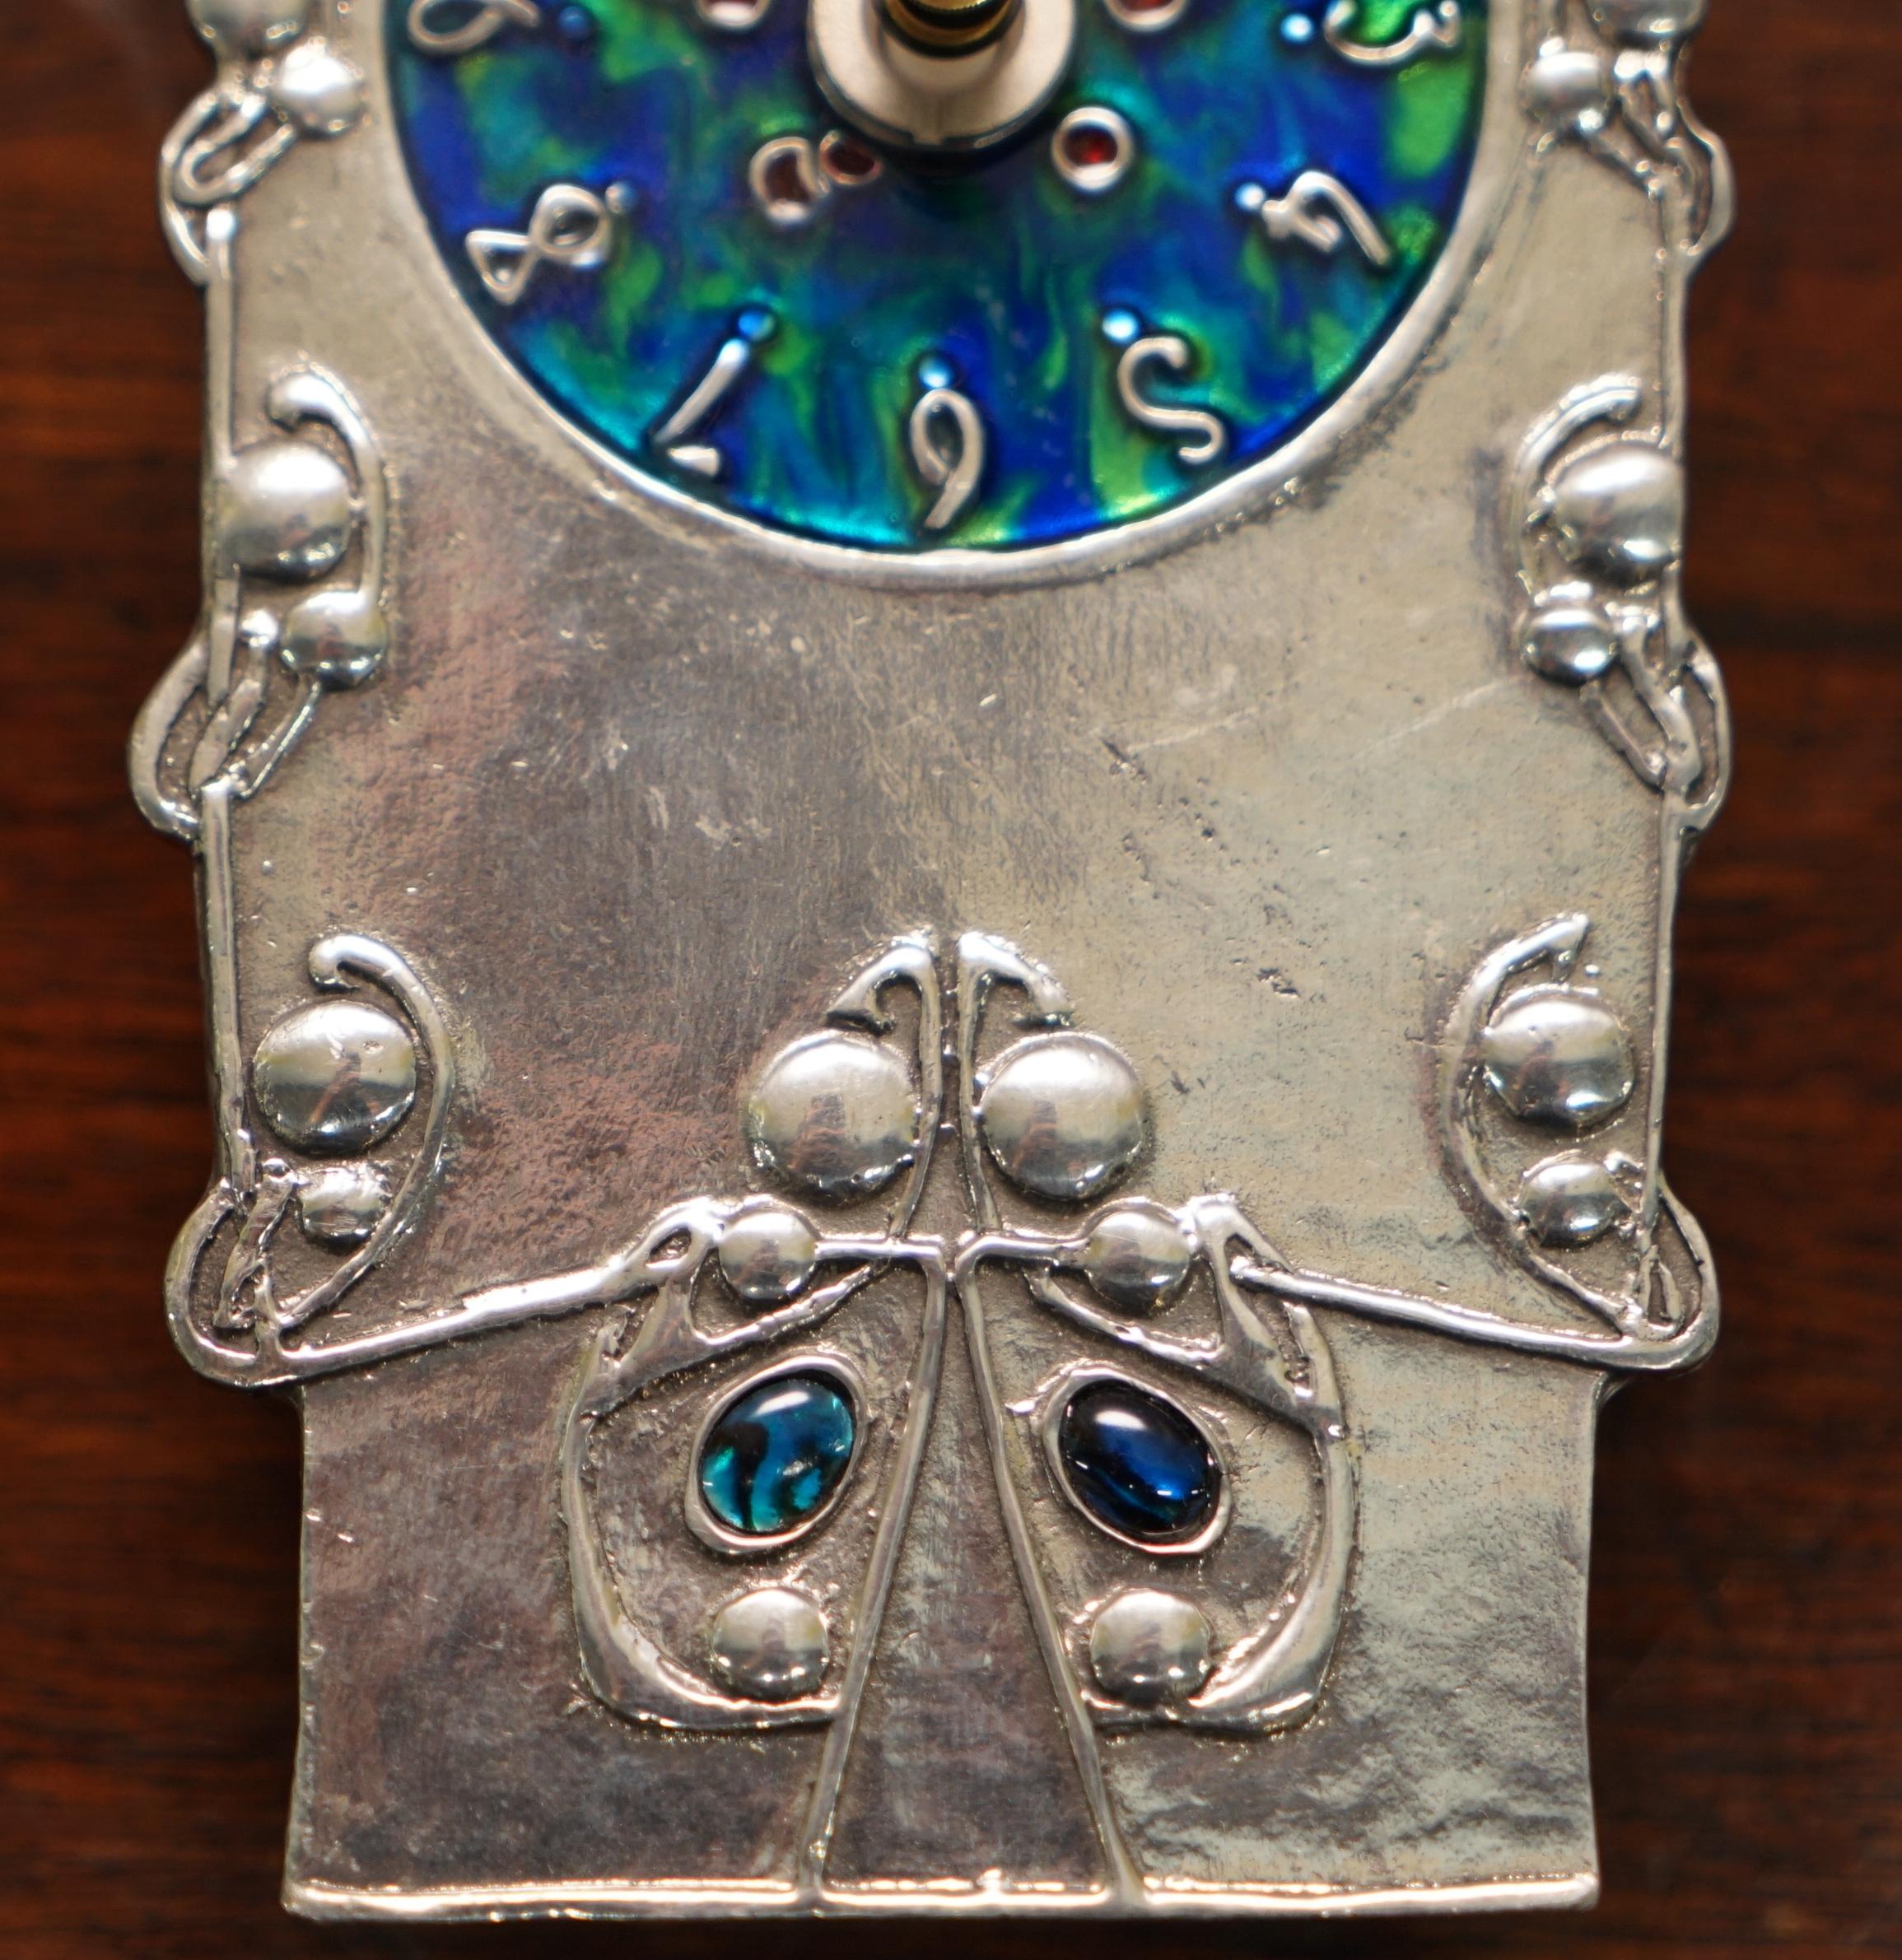 Hand-Crafted Vintage Pewter and Enamel Mantle Clock with Lovely Blue Dial Hallmarked Inside